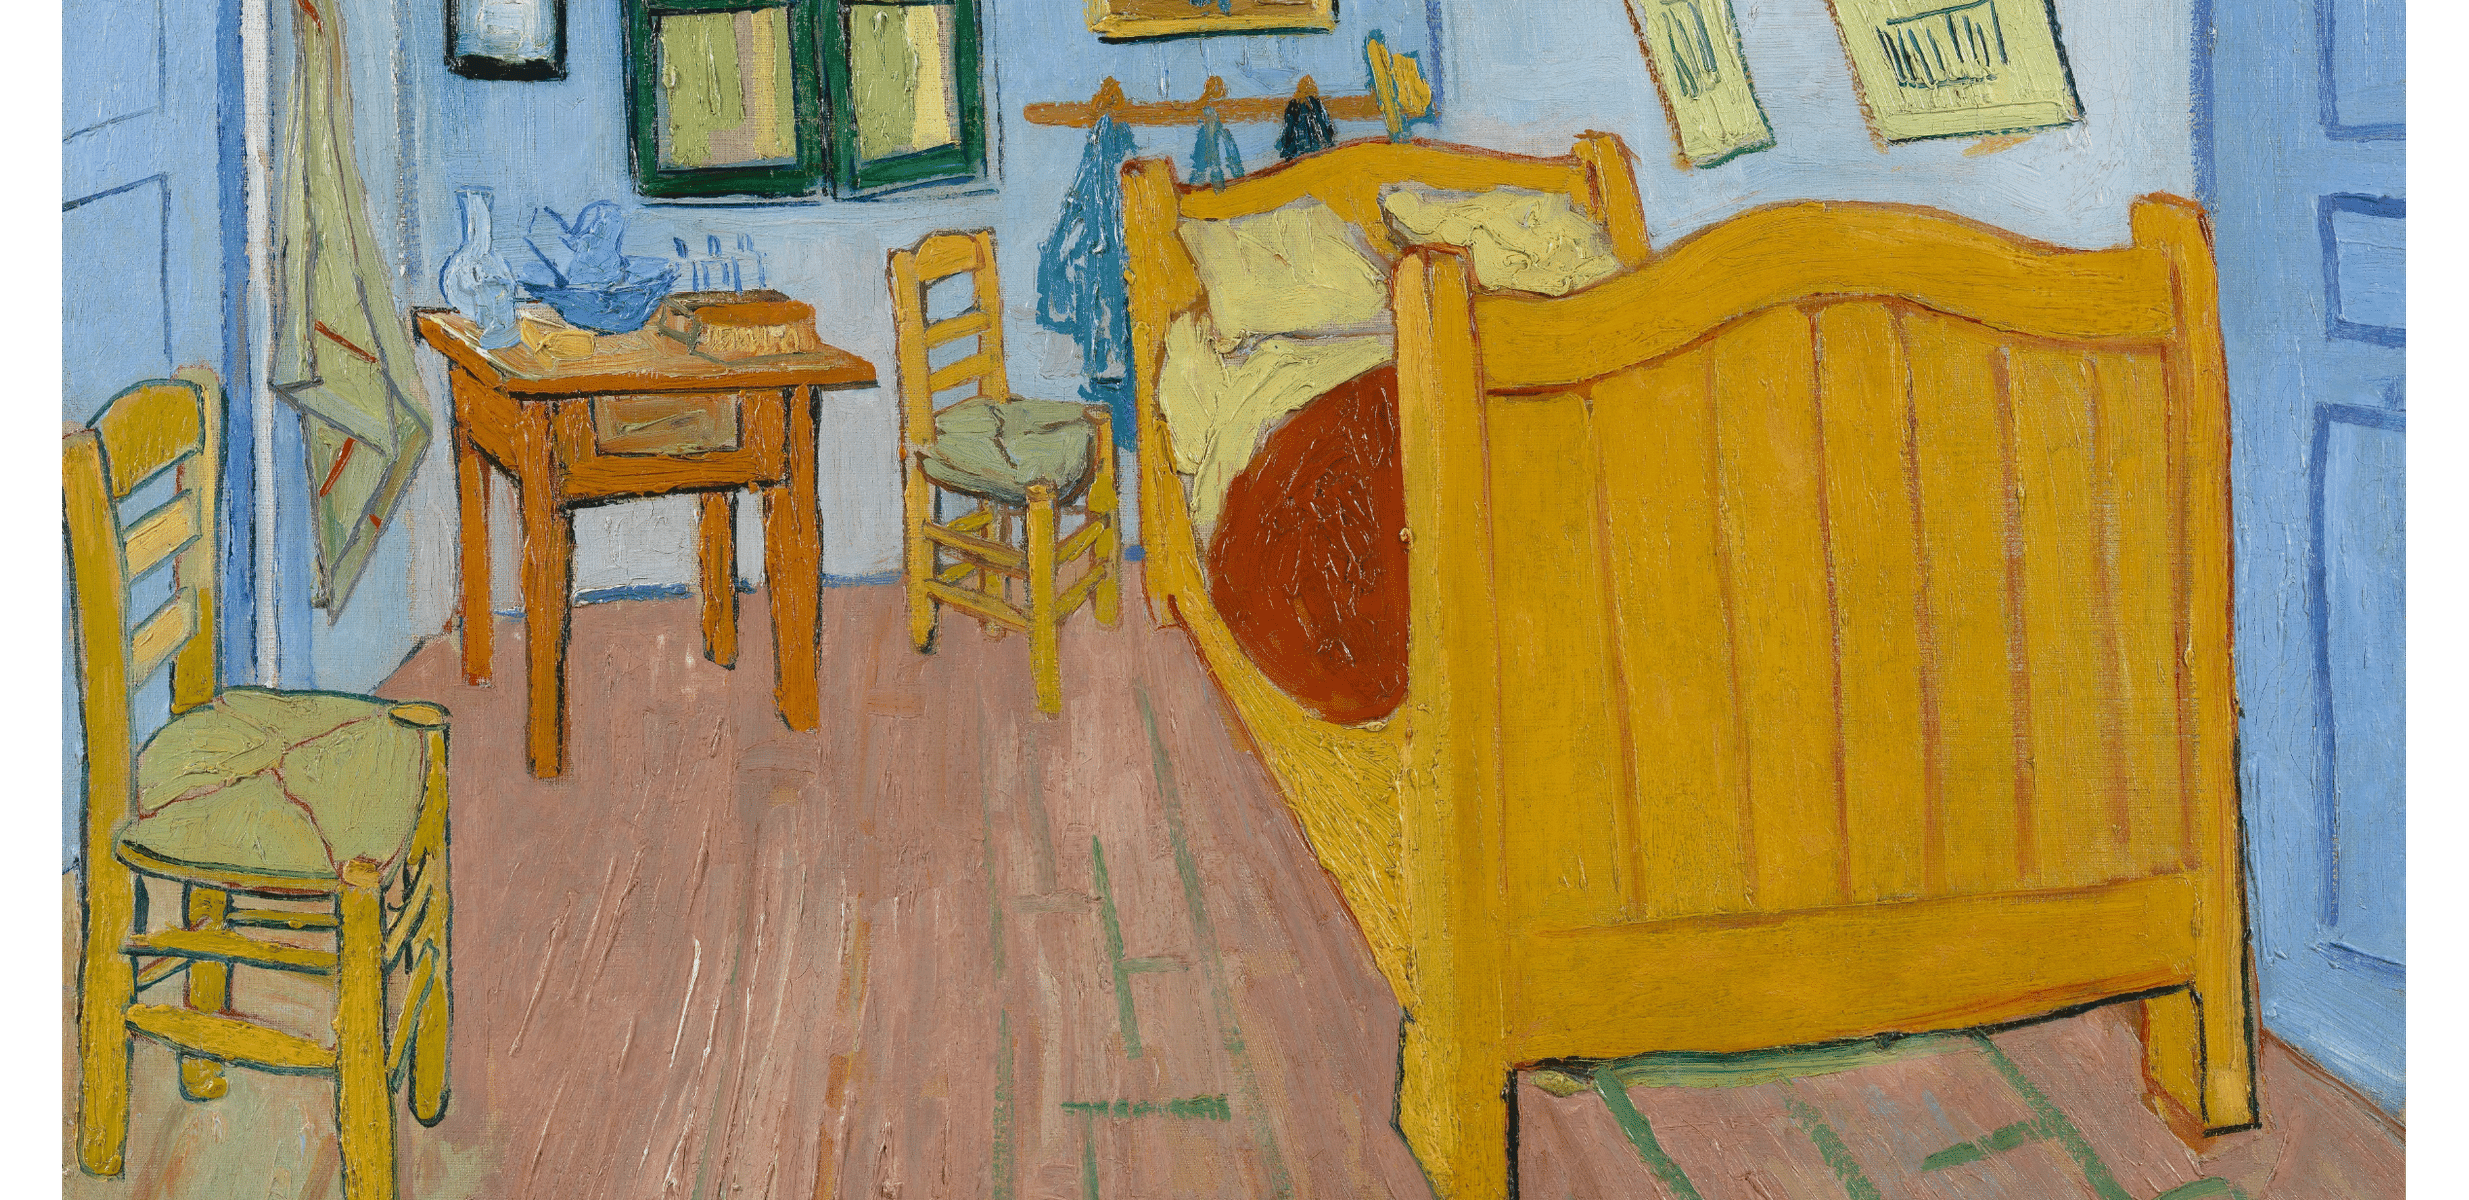 See the painting of The Bedroom